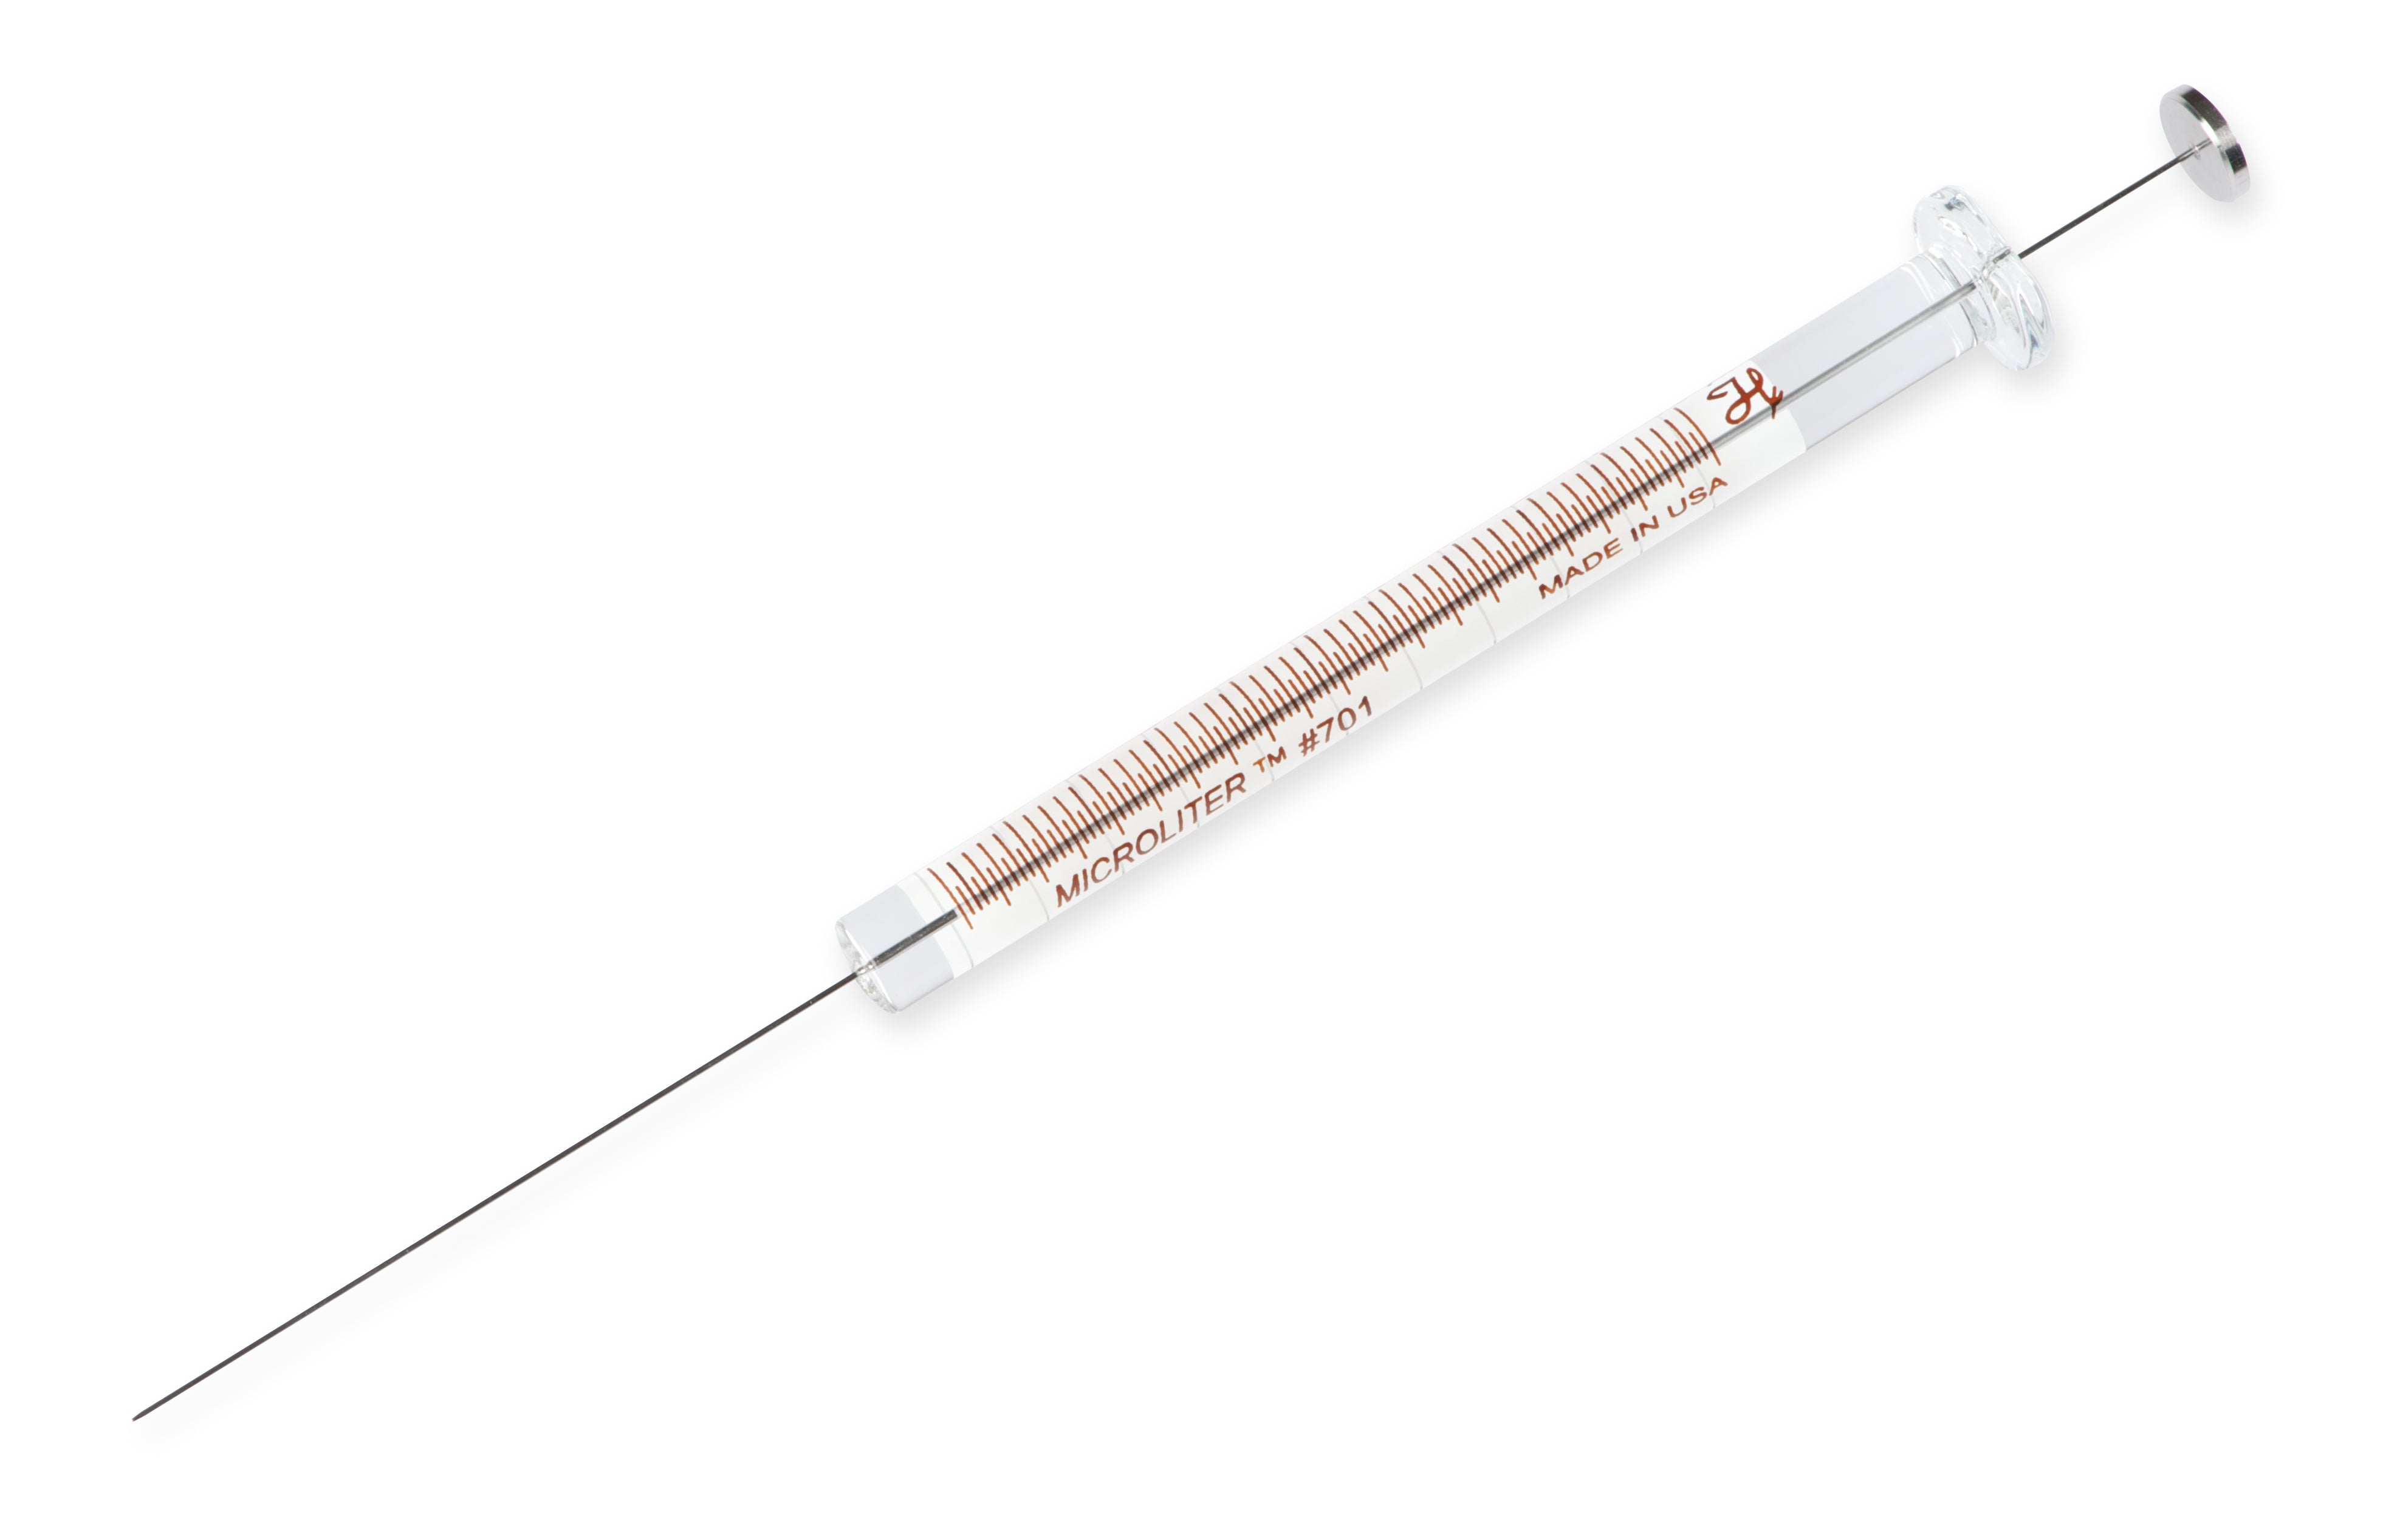 10 µL, Model 701 N CTC SYR (6.6 mm), S-Line, Cemented Needle, 26s ga, point style AS